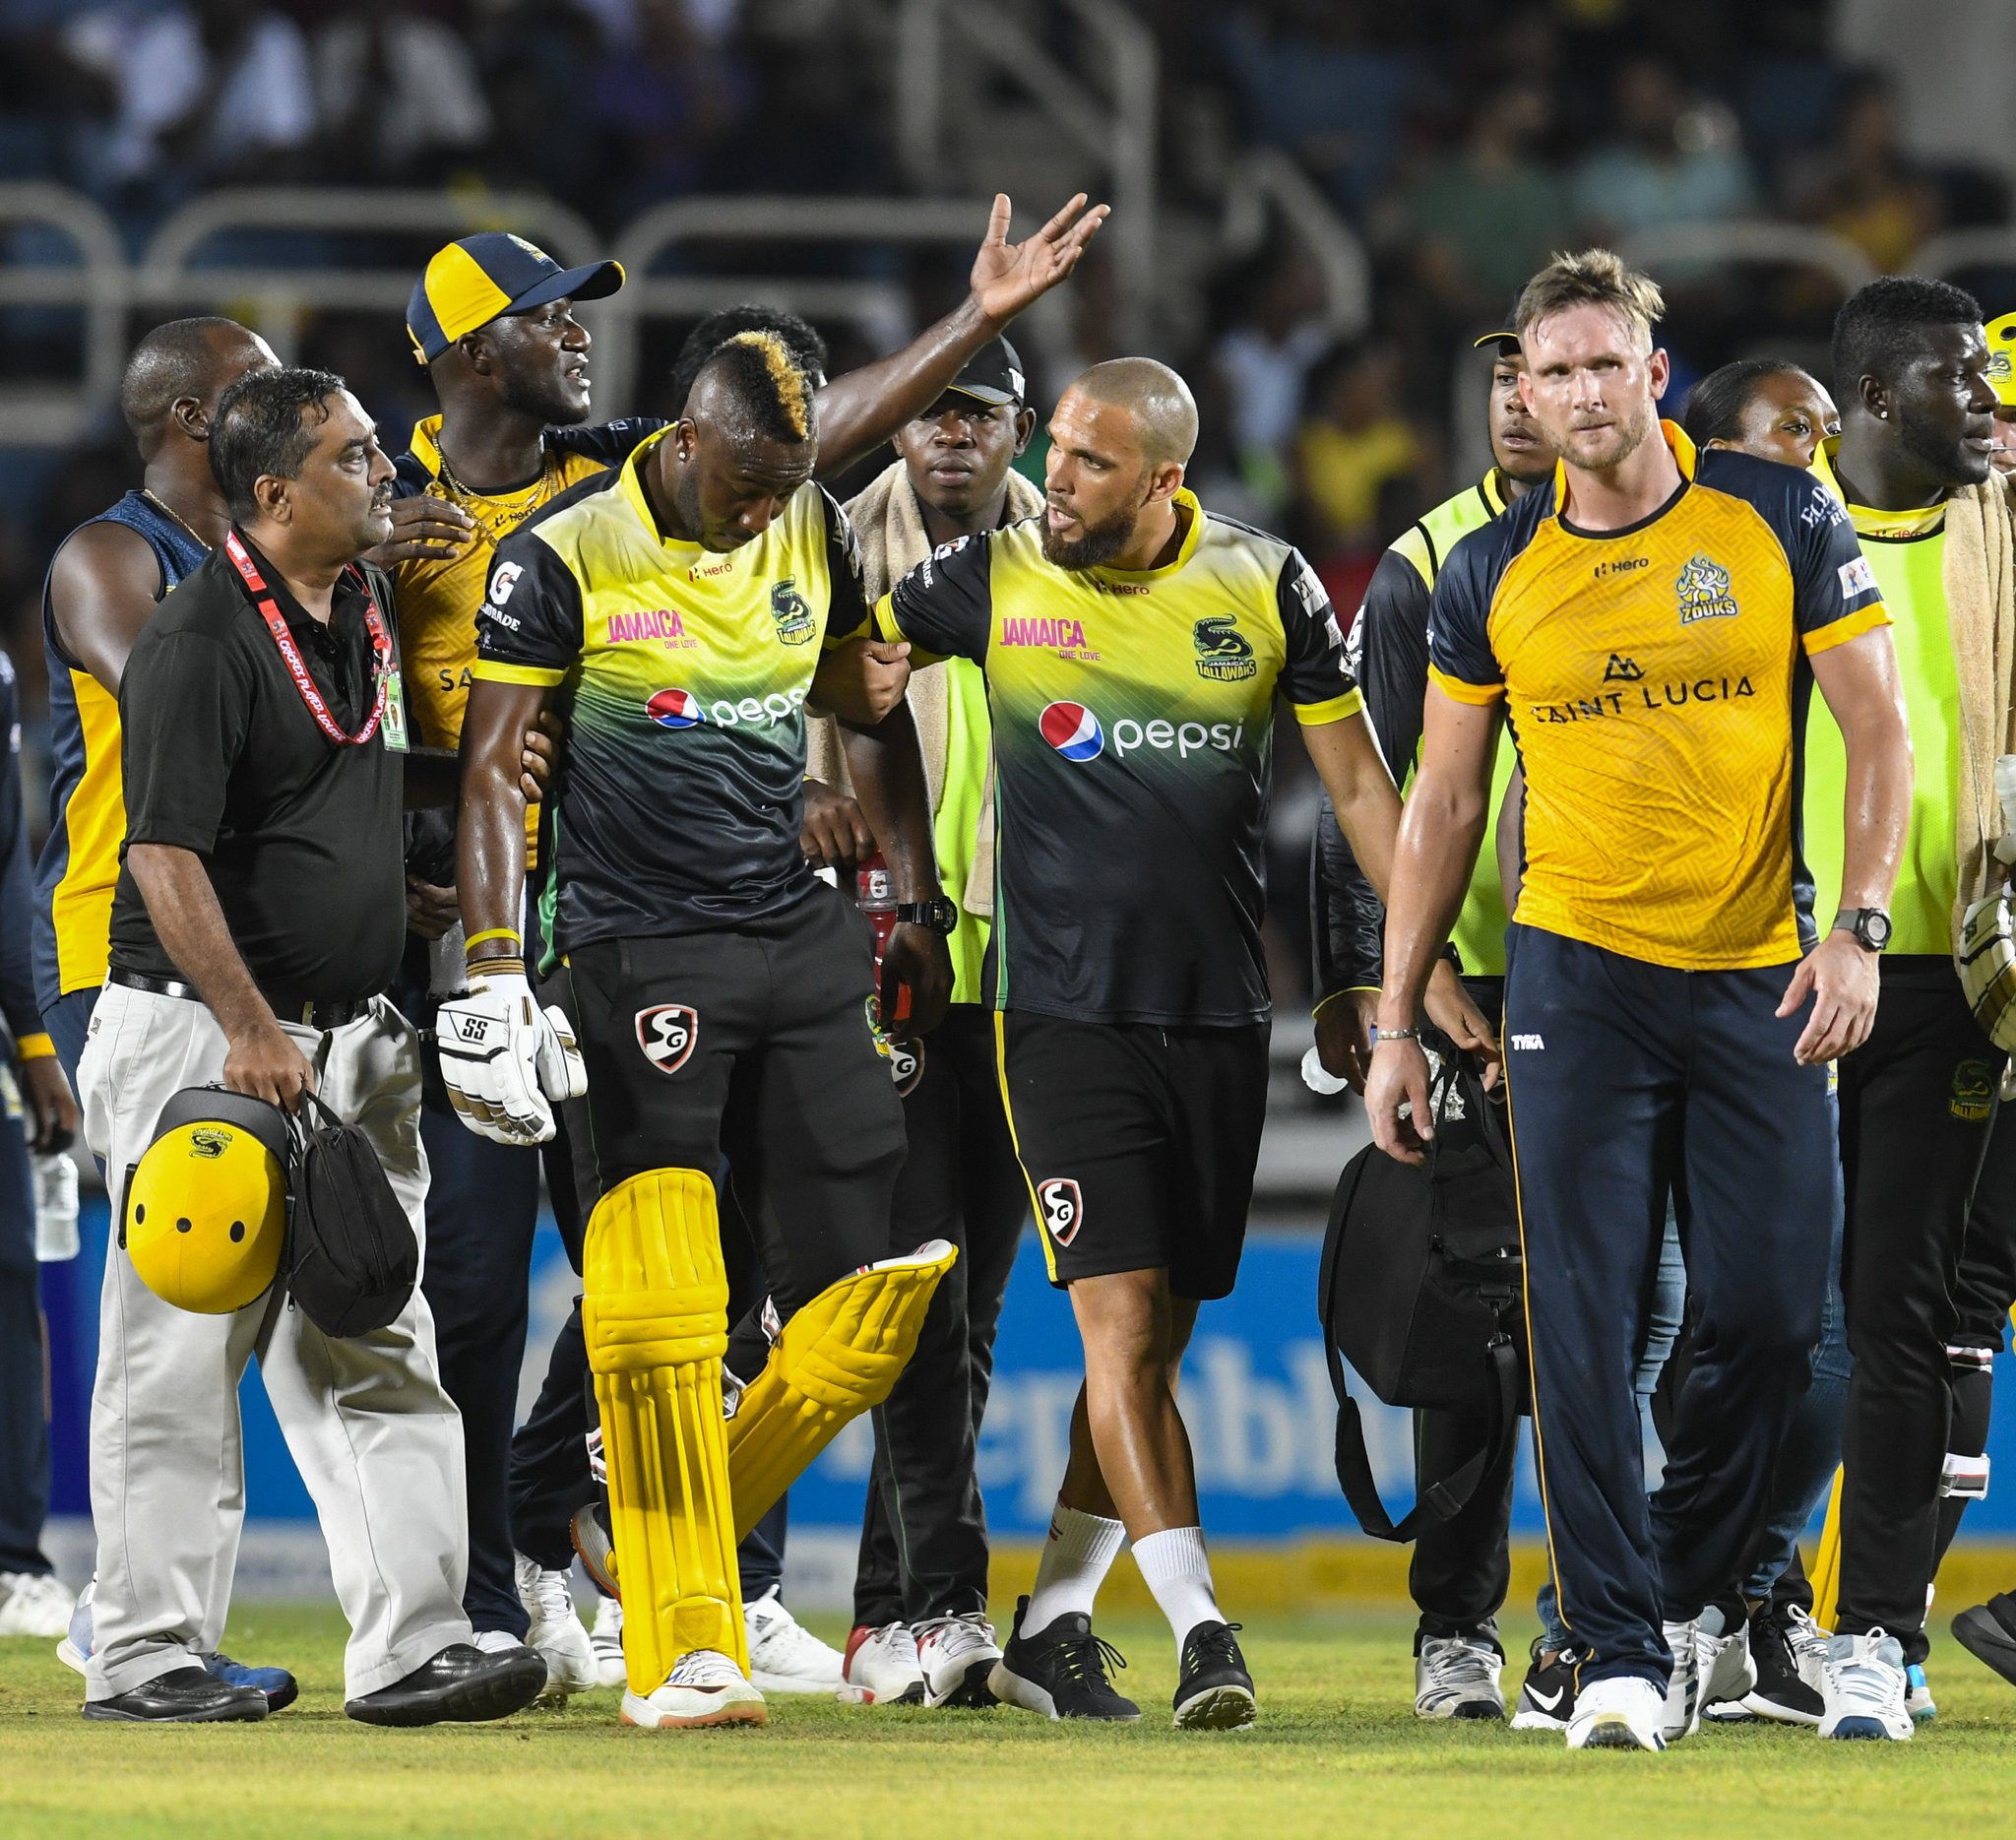 Andre Russell walked off the field after hit by a bouncer.